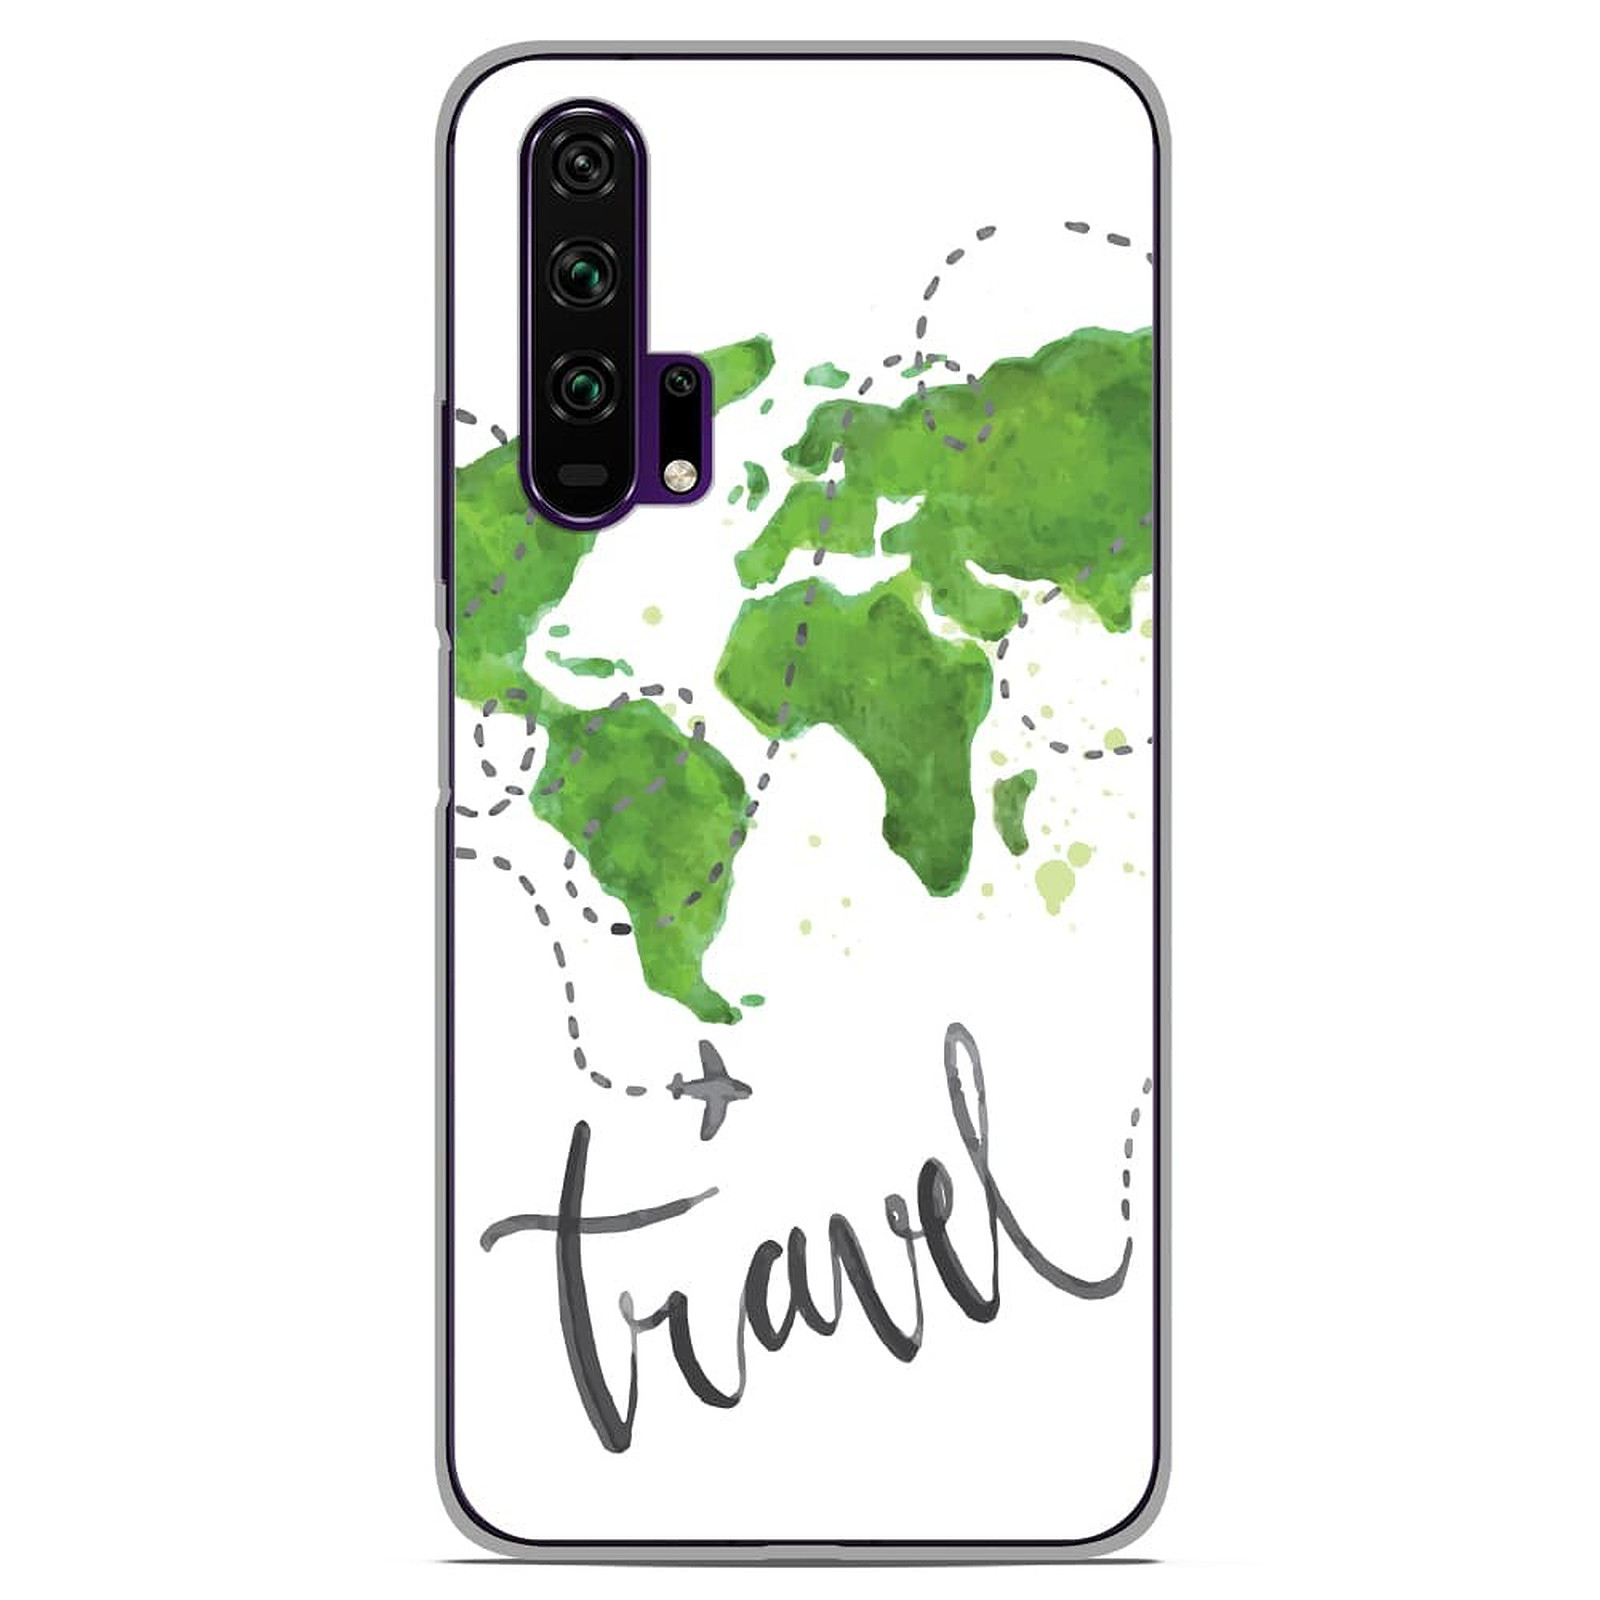 1001 Coques Coque silicone gel Huawei Honor 20 Pro motif Map Travel - Coque telephone 1001Coques